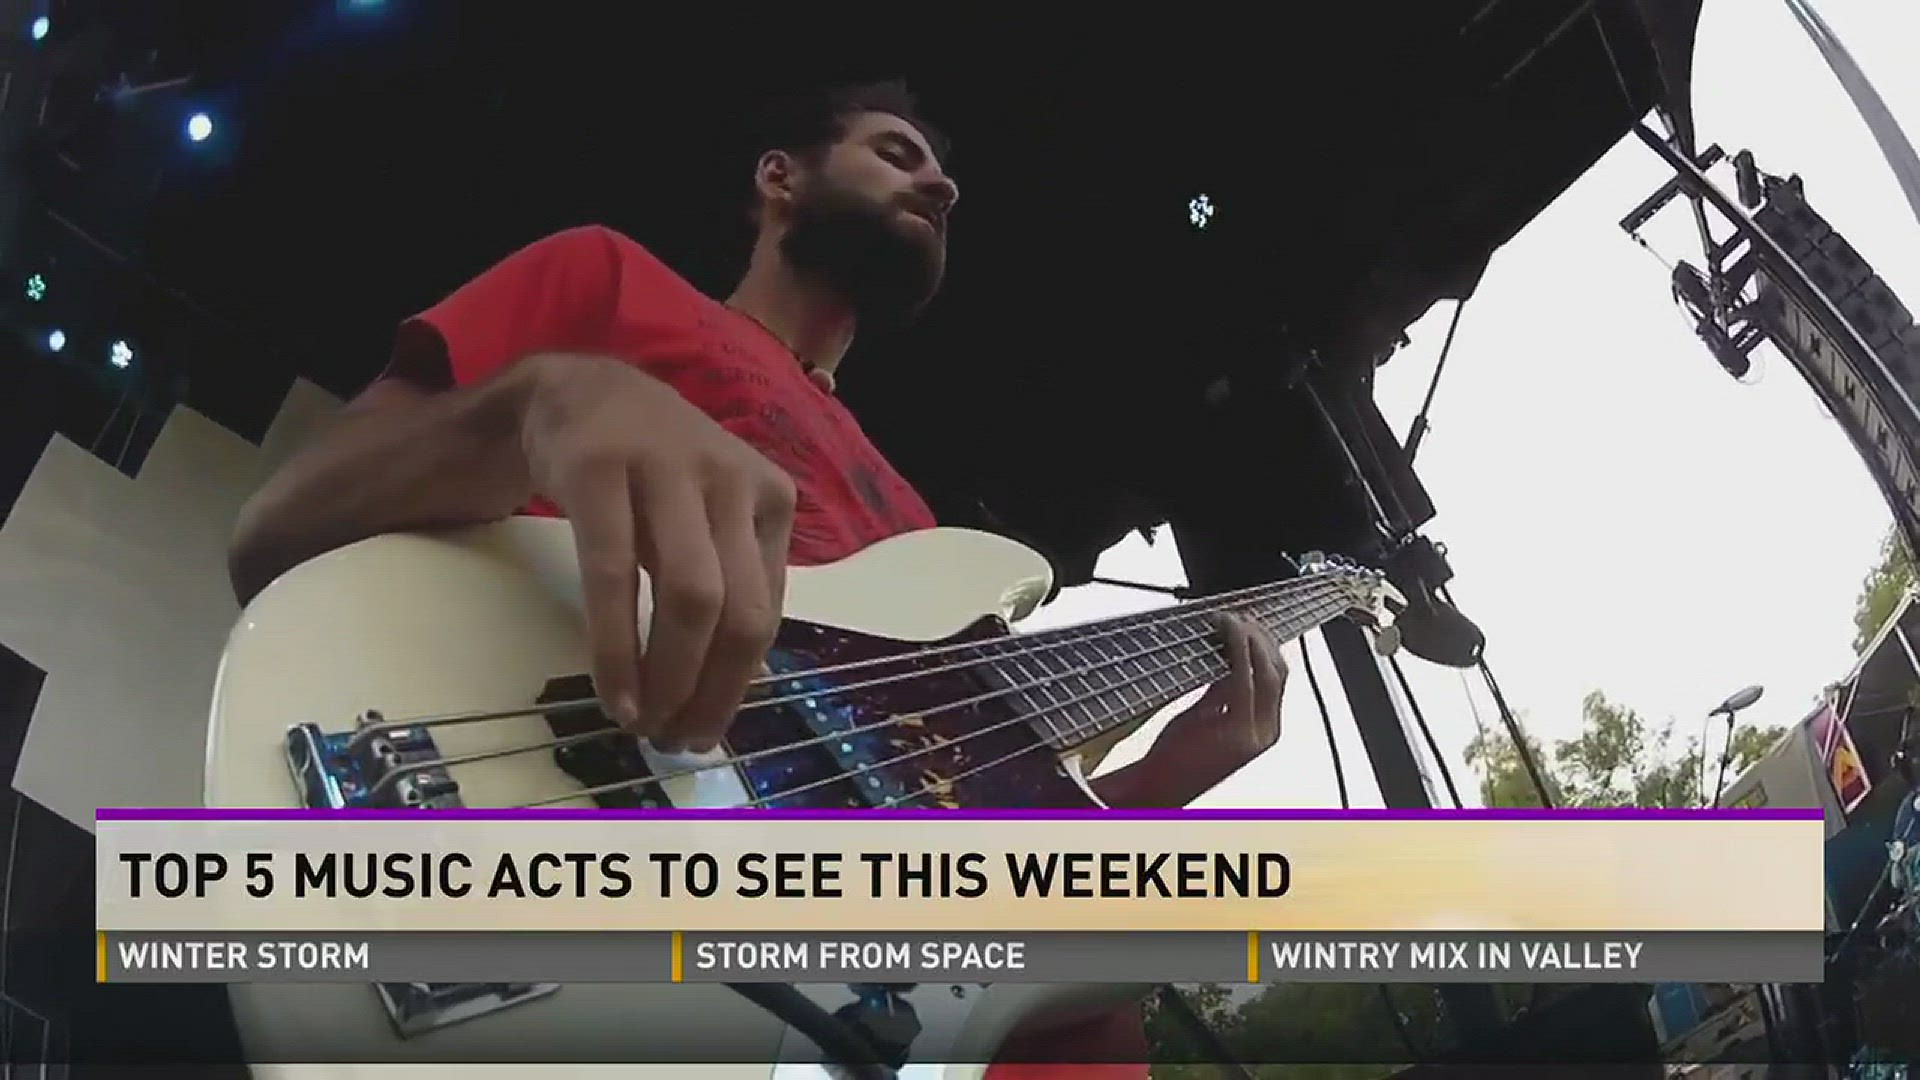 Top 5 Music Acts to See this Weekend